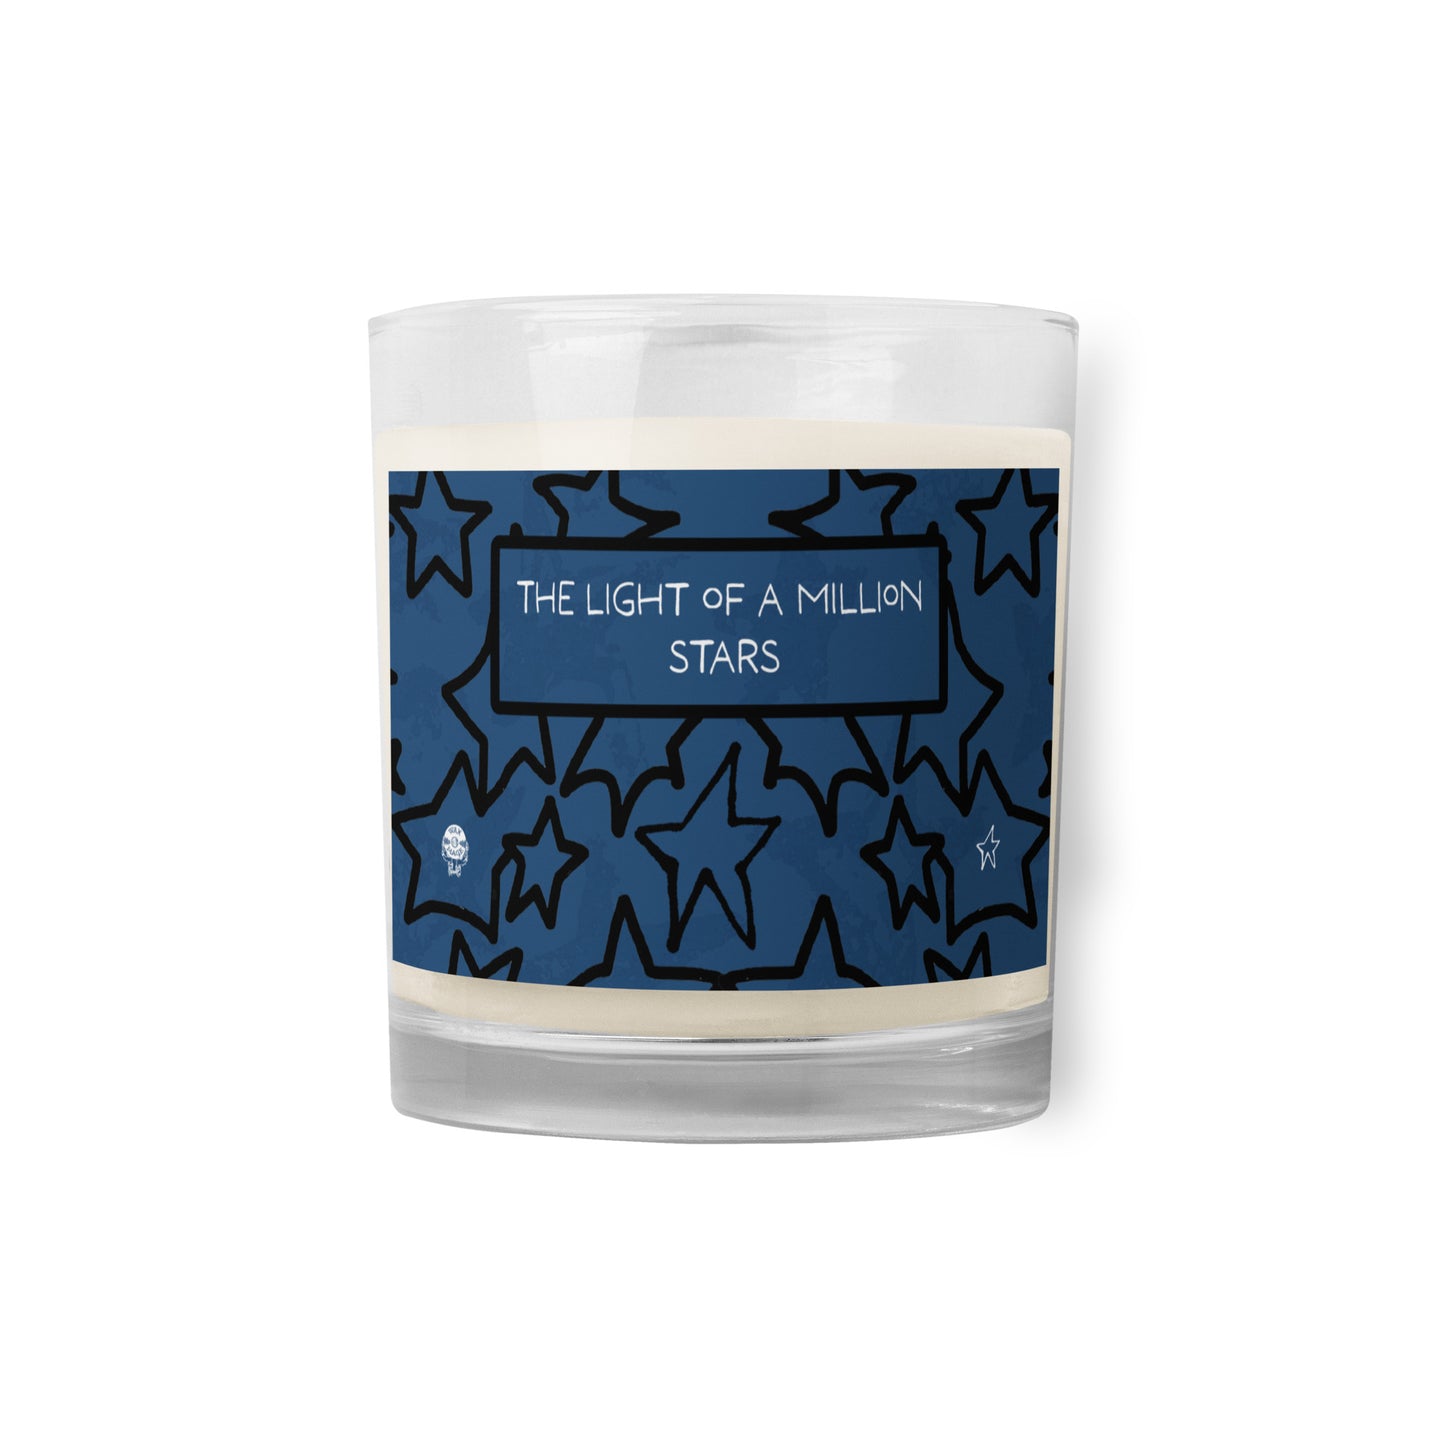 "The Light of a Million Stars" Candle